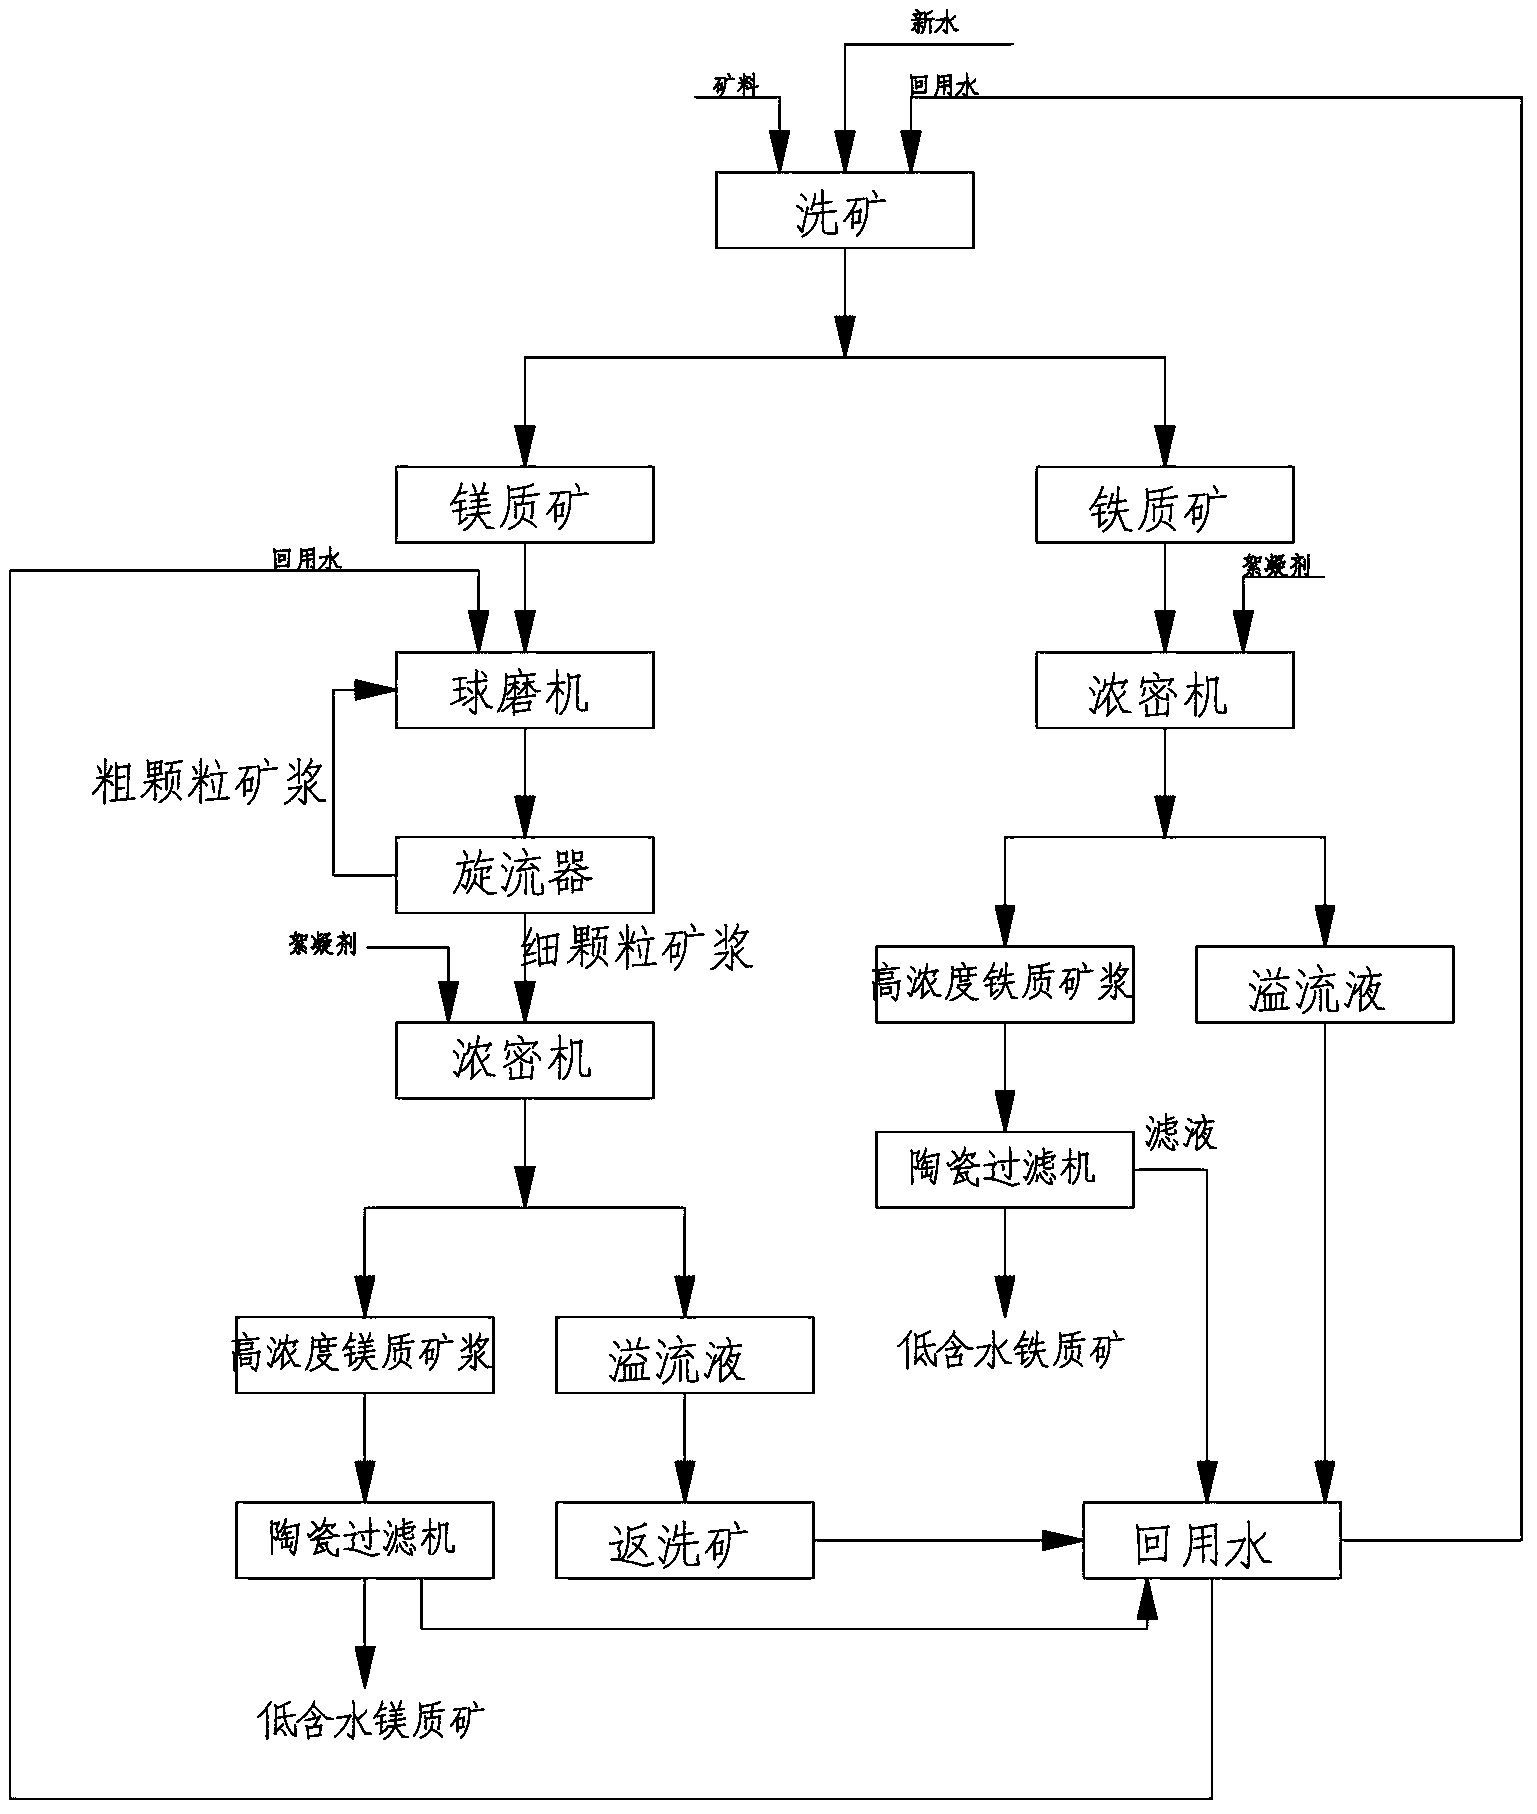 Method for recovering valuable metal from red soil nickel minerals comprehensively